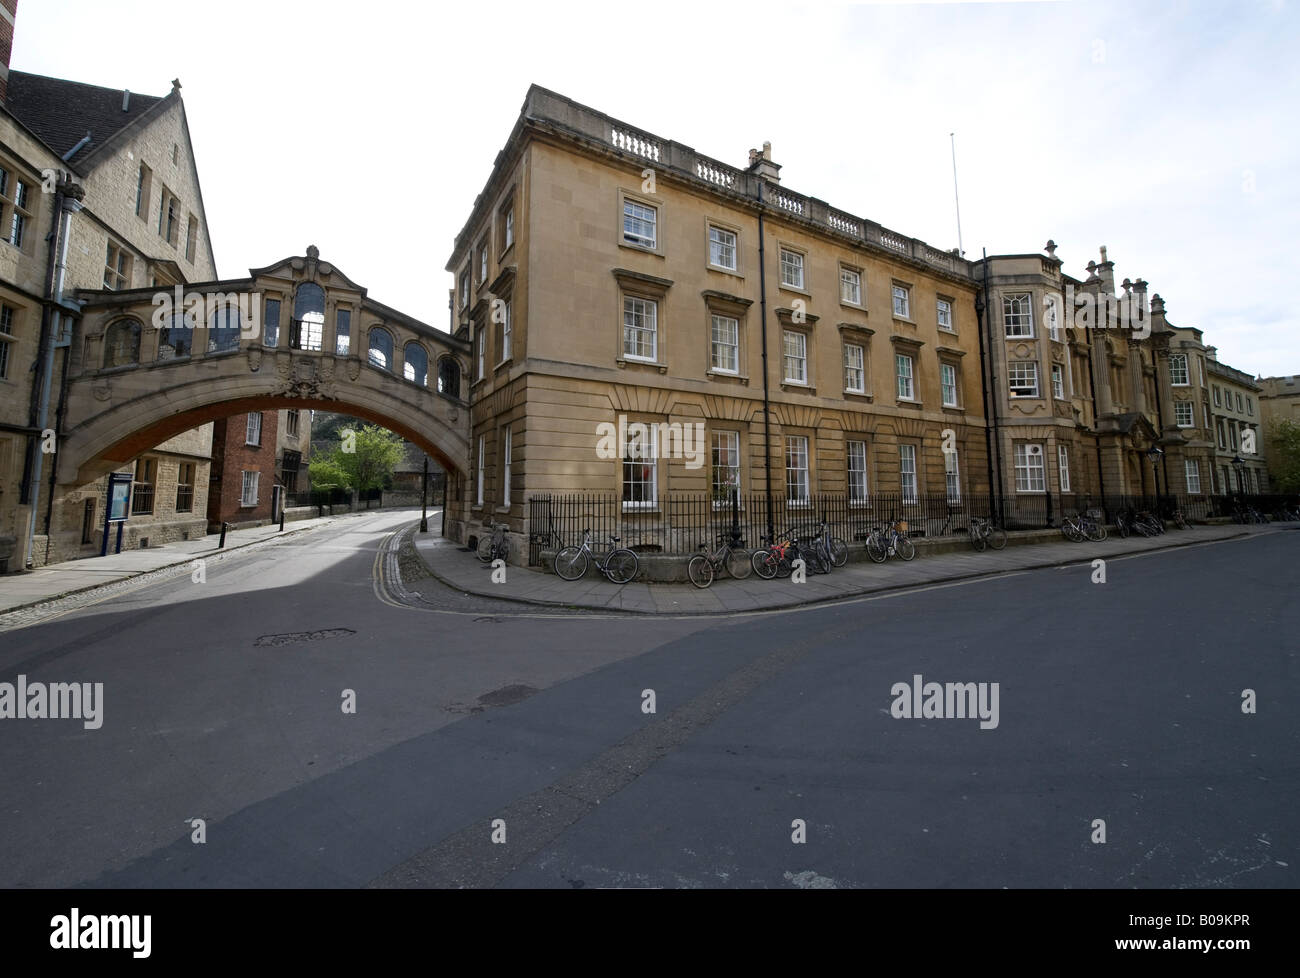 Hertford College 'Bridge of Sighs' which links the Colleges Old and New Quads Stock Photo